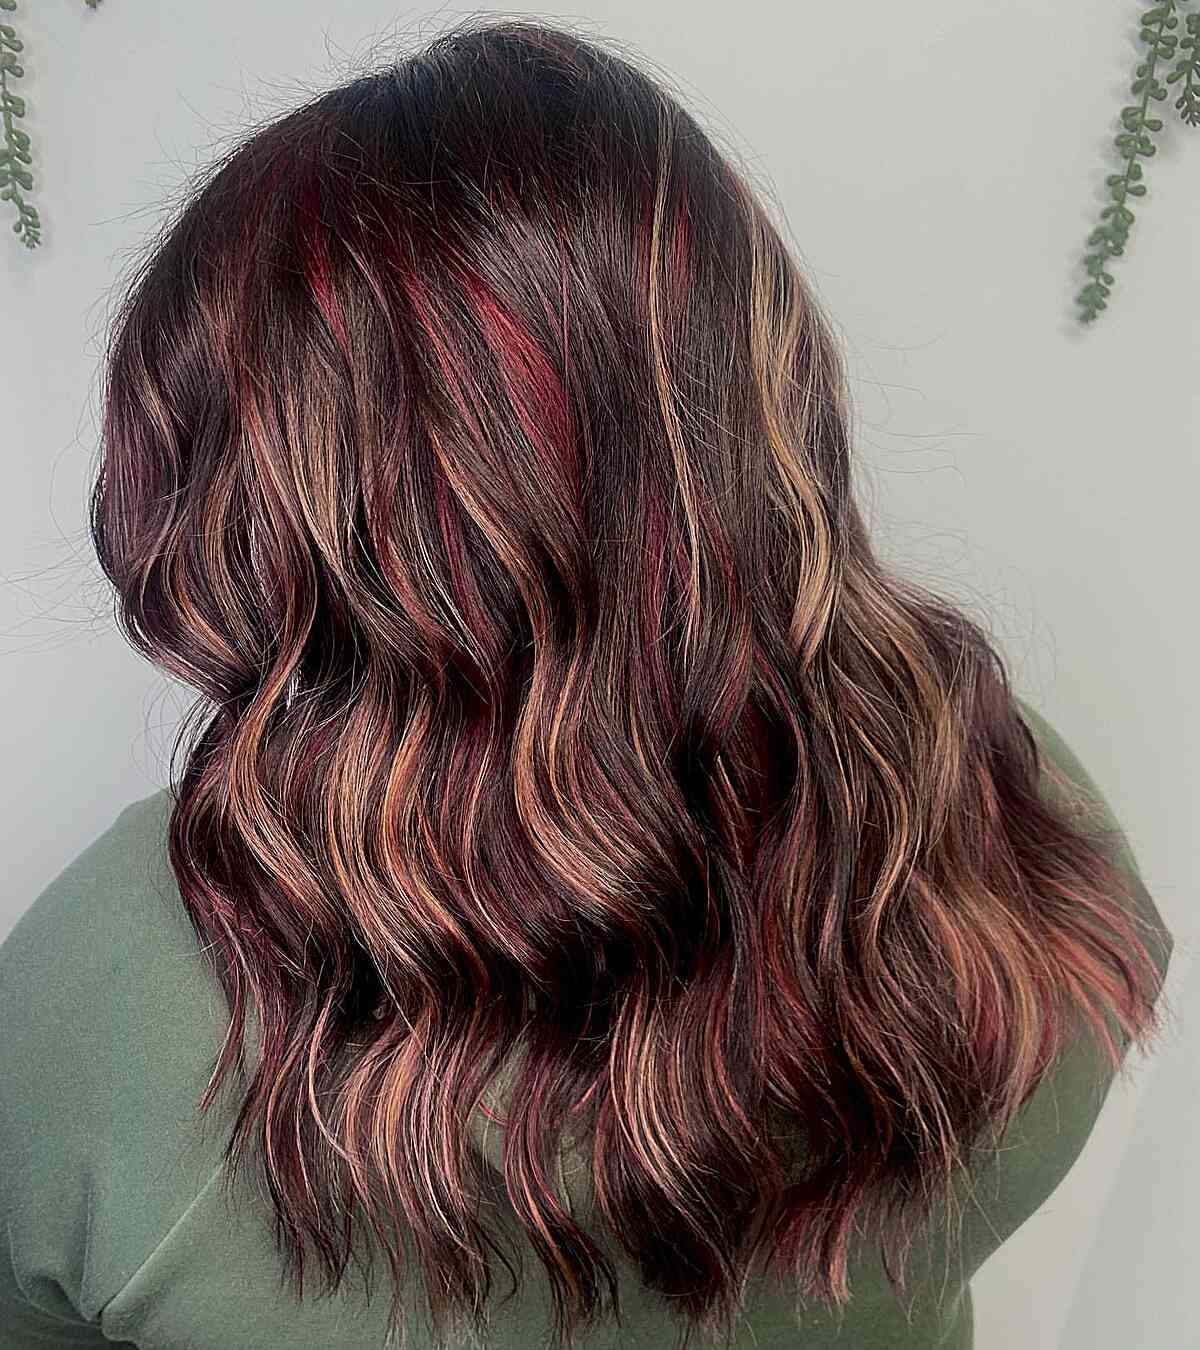 Red and Black Hair: Ombre, Balayage &amp; Highlights